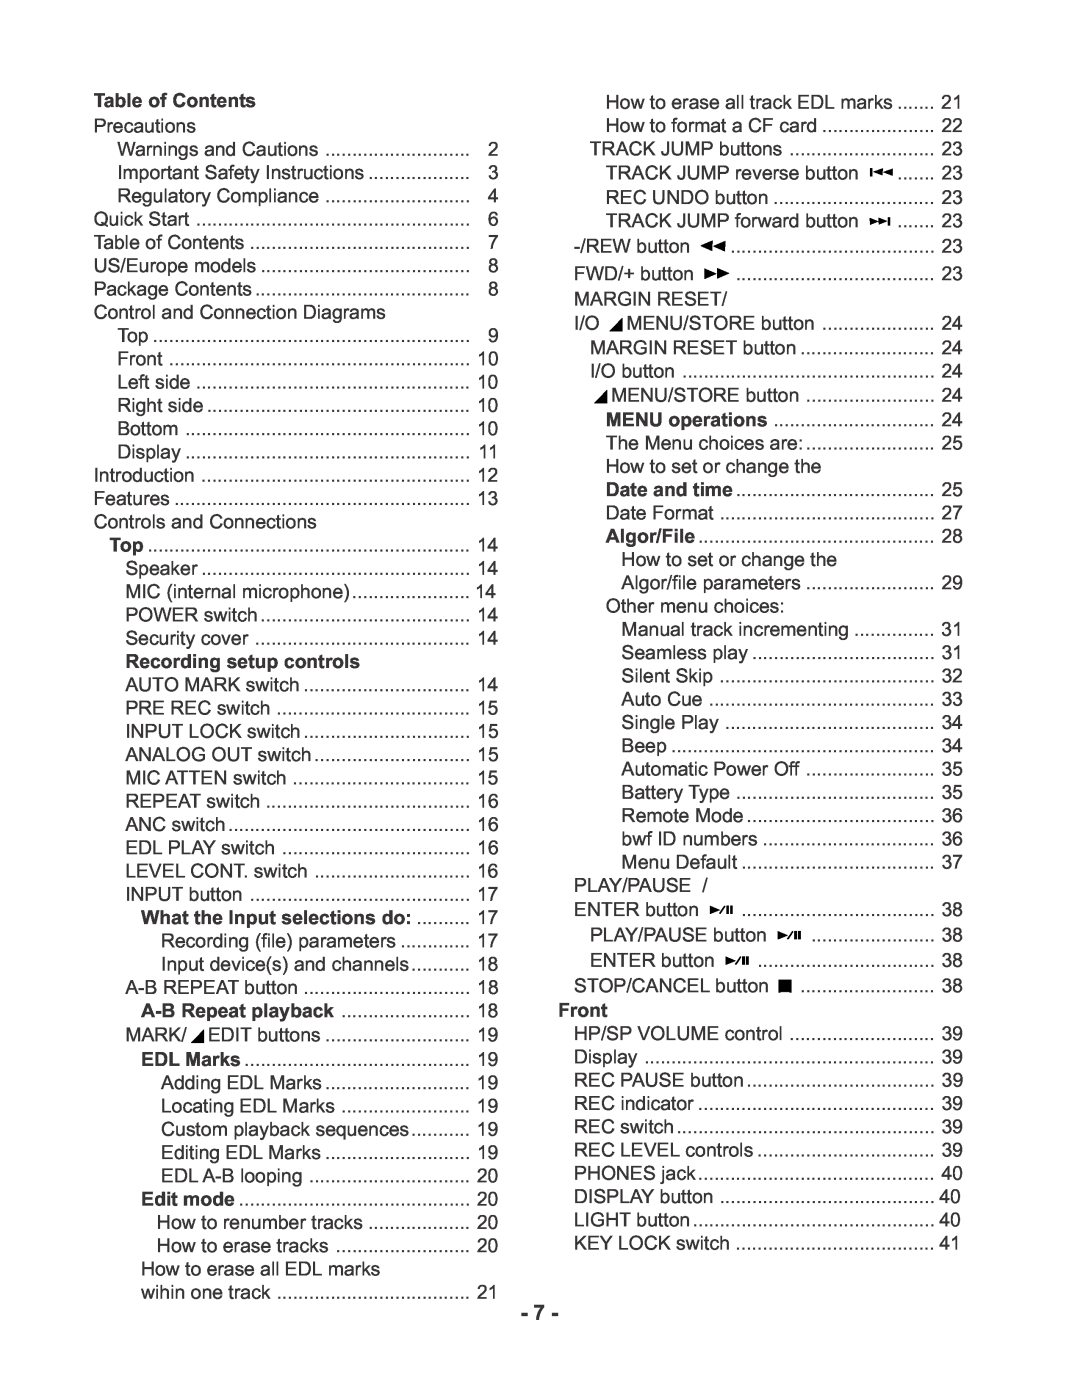 Marantz PMD670 manual Table of Contents, Recording setup controls, What the Input selections do 